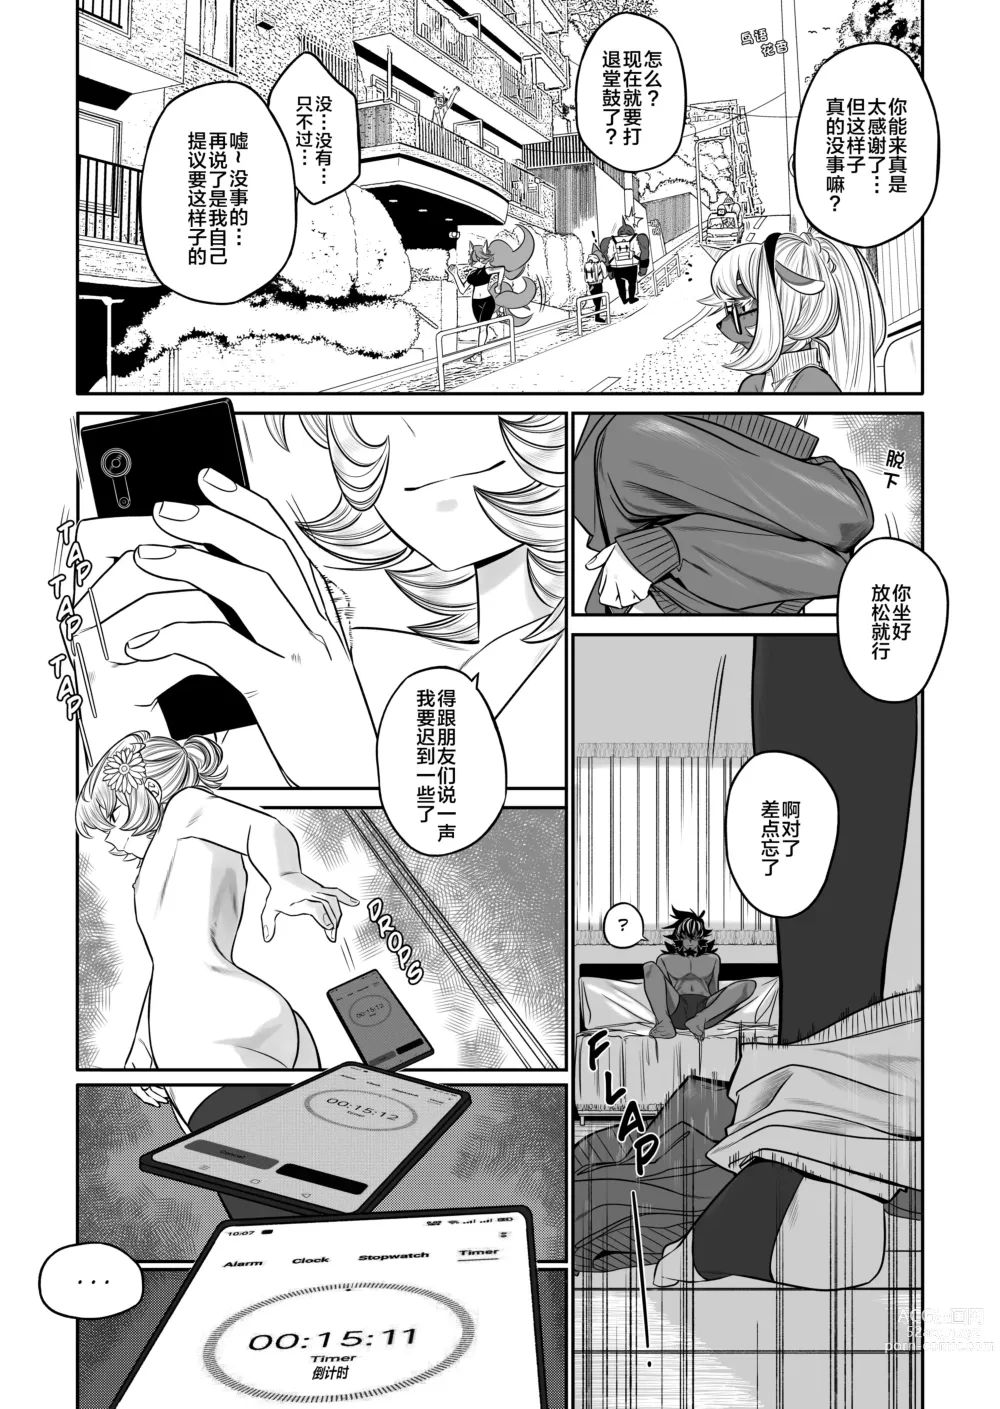 Page 3 of doujinshi 狡猾小恶魔